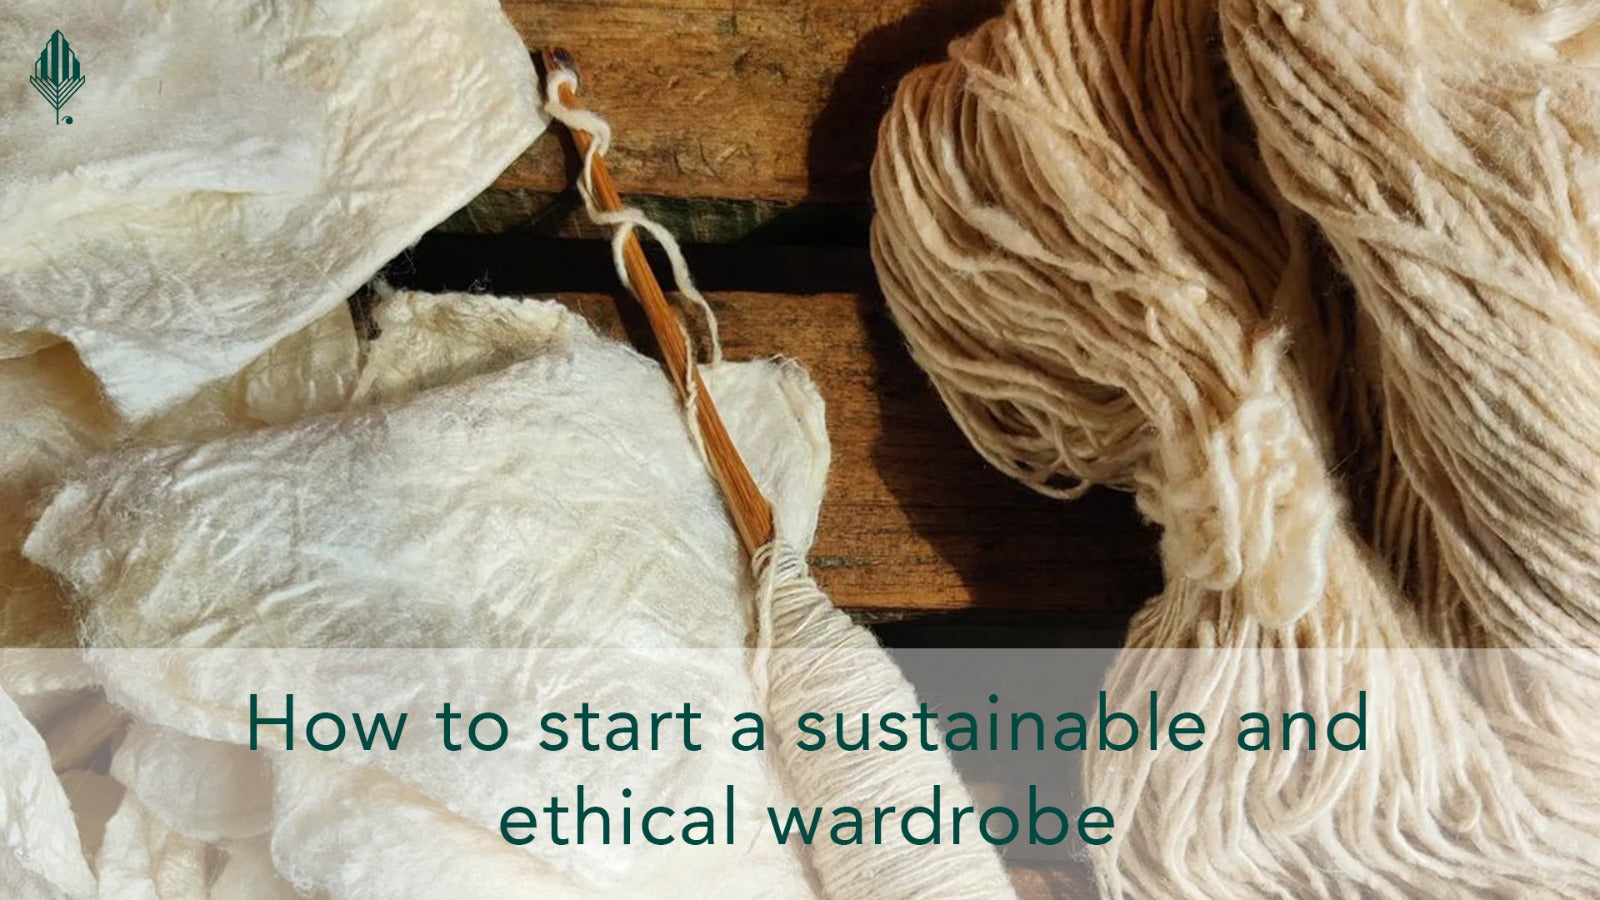 How To Start A Sustainable And Ethical Wardrobe?